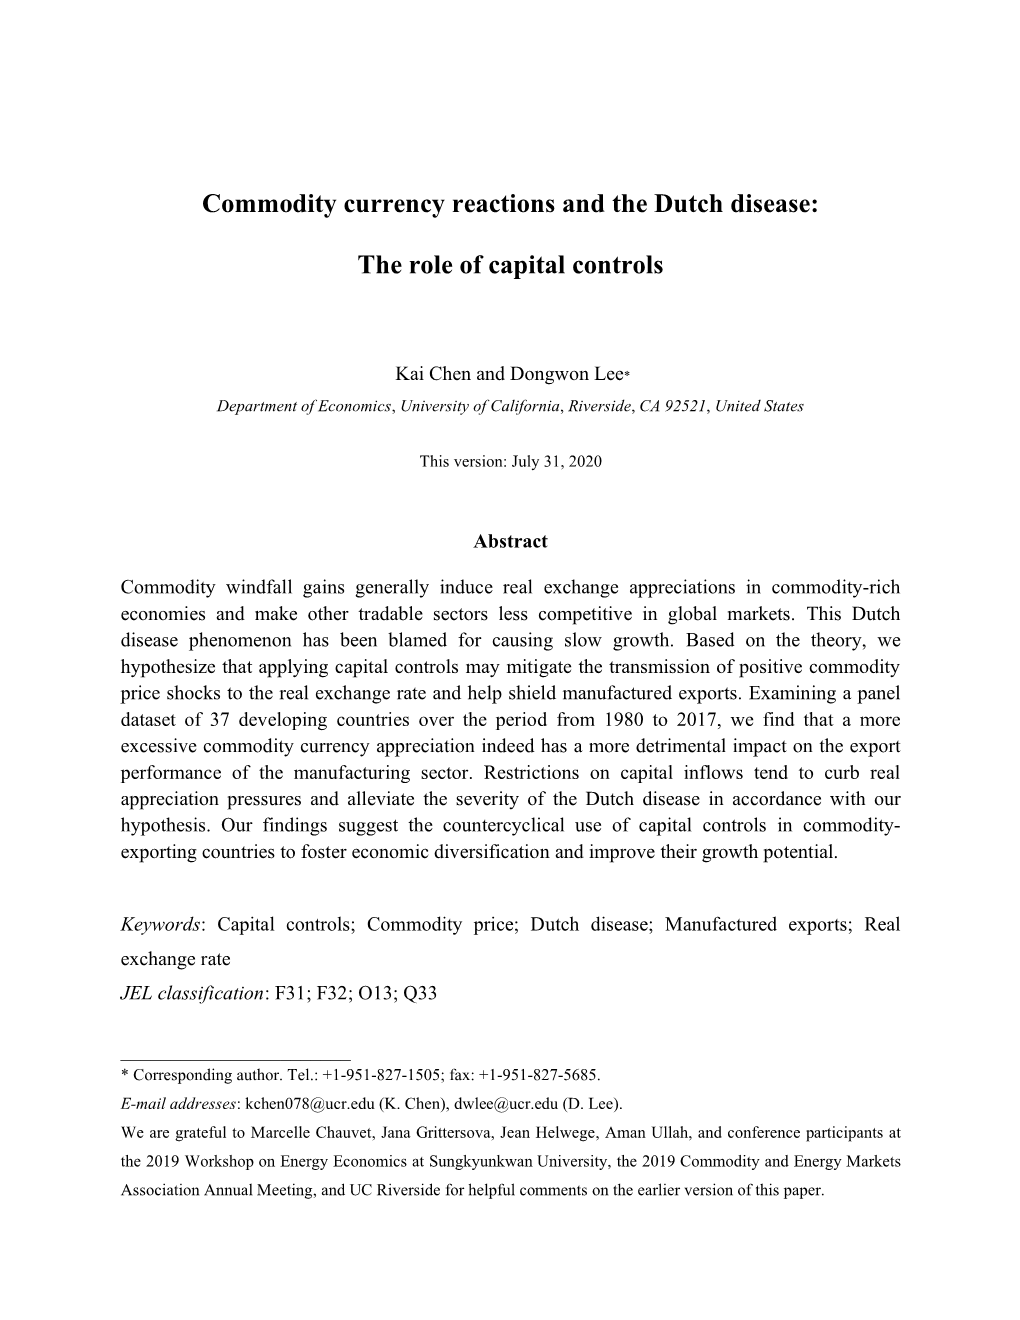 Commodity Currency Reactions and the Dutch Disease